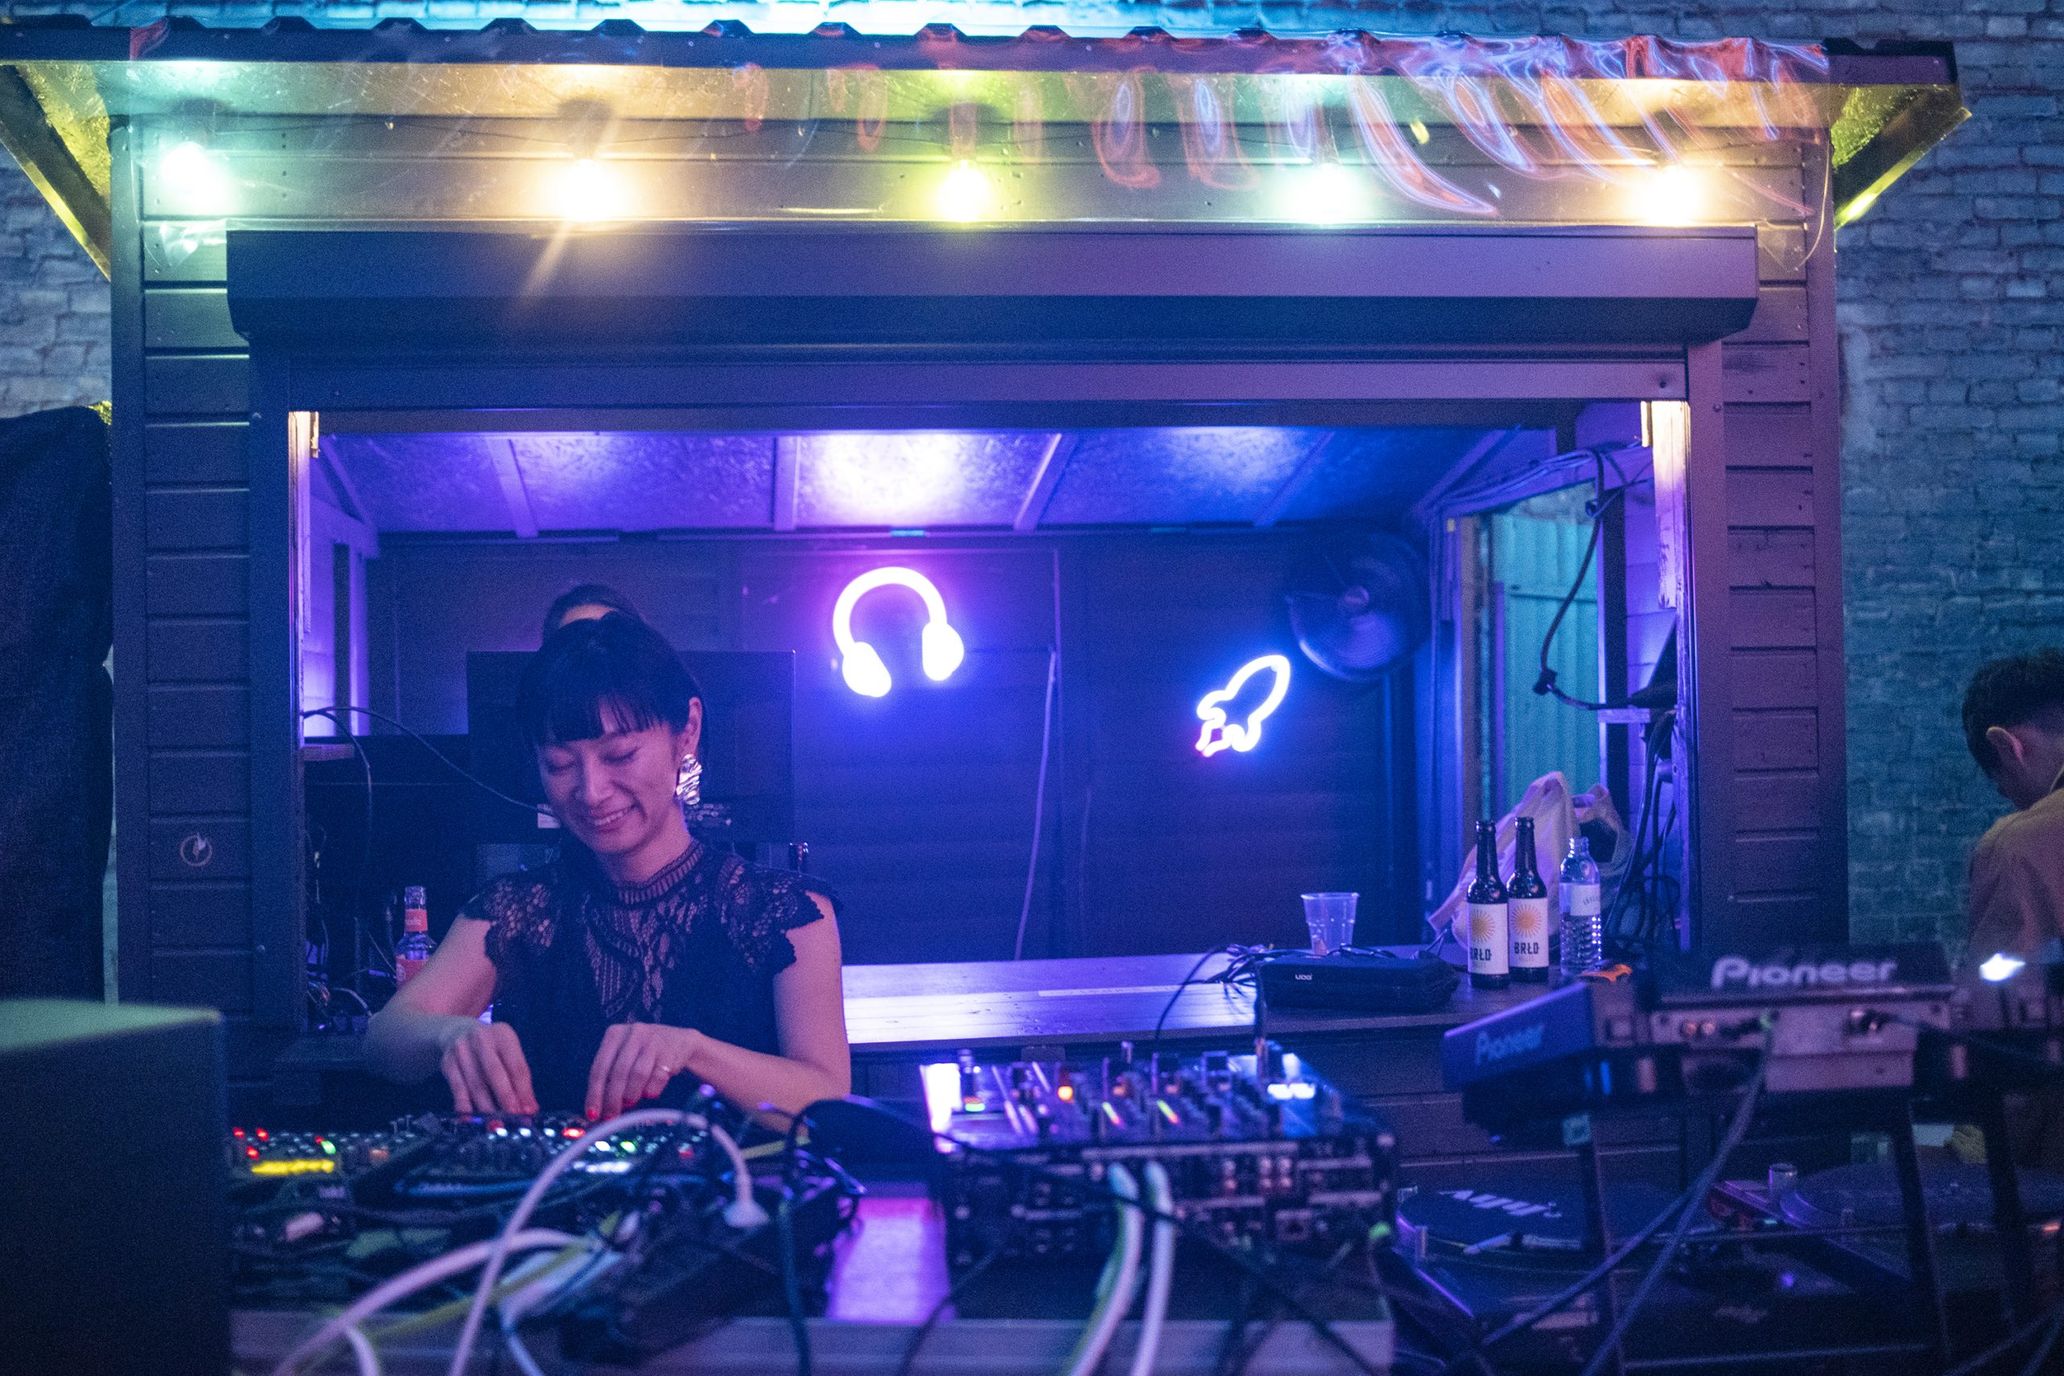 During Kyoka’s live performance, the space in front of the booth was filled with the audience dancing to intense beats. The pounding beats and groovy sounds quickly plunged the venue into a feverish party mode.